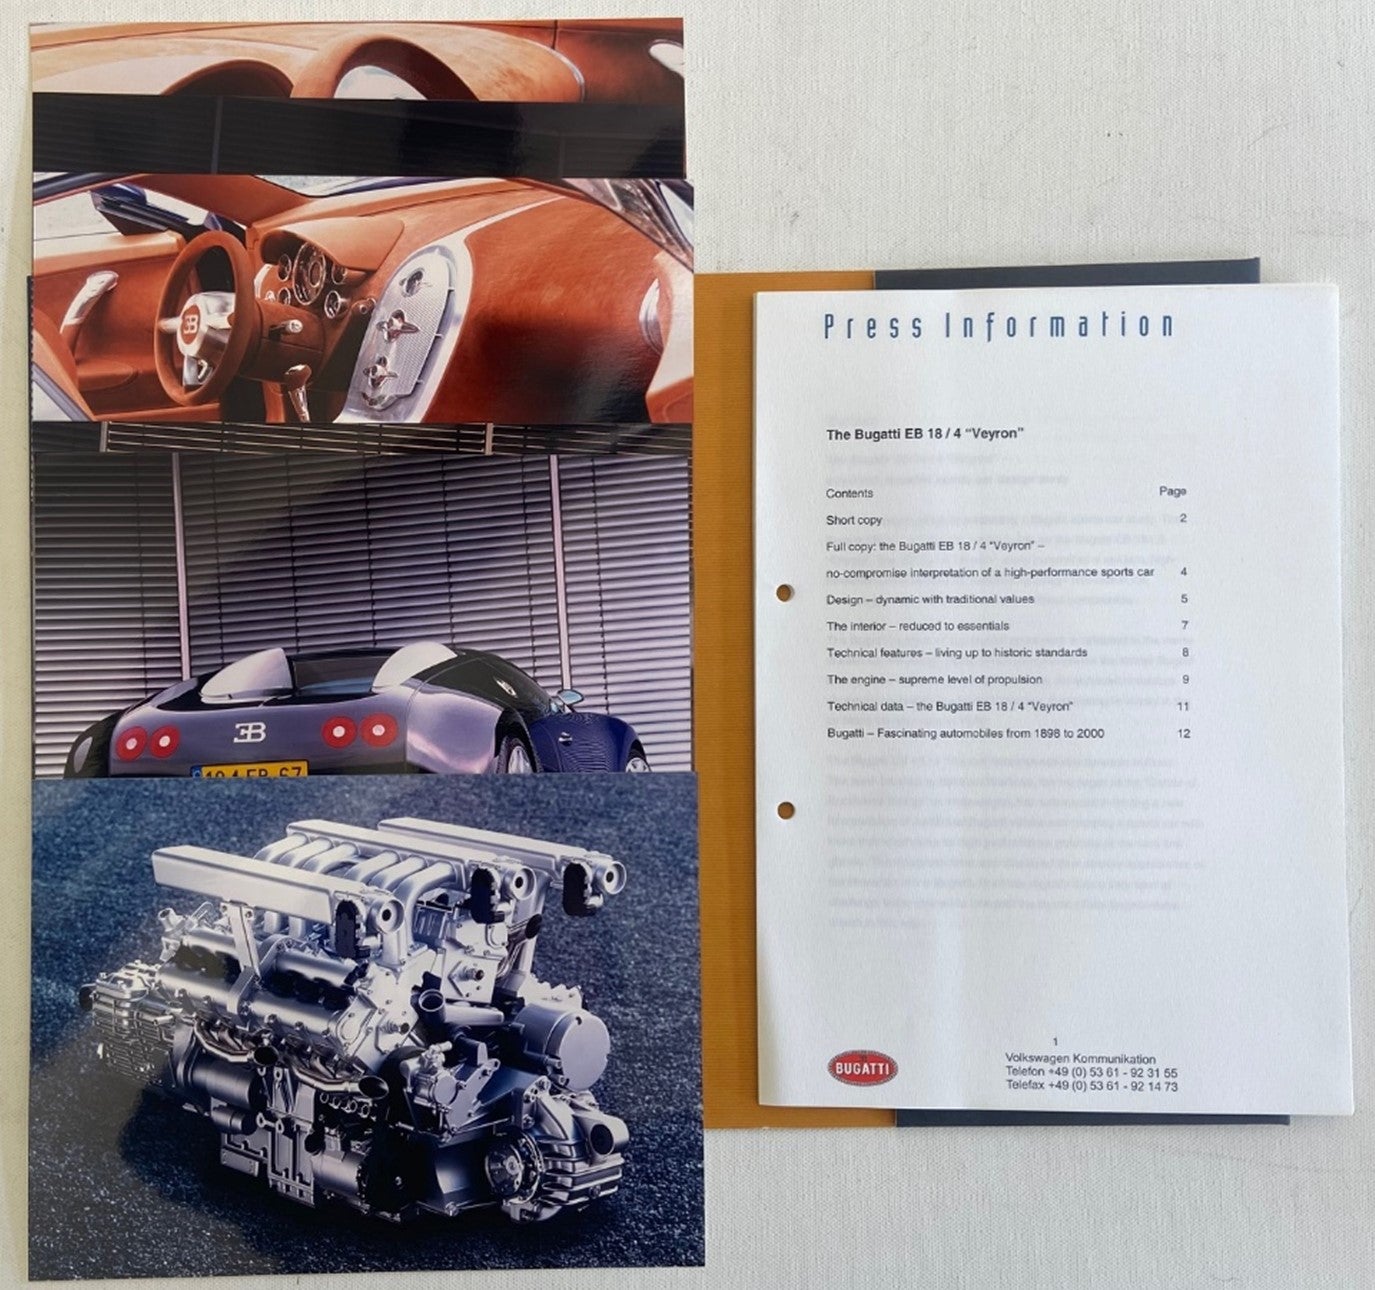 Korting importeren Meestal Press Kit for 1999 Bugatti 18/4 Veyron Concept Car with photos Predating  the First Manufactured Bugatti Veyron by 6 years | Bugatti